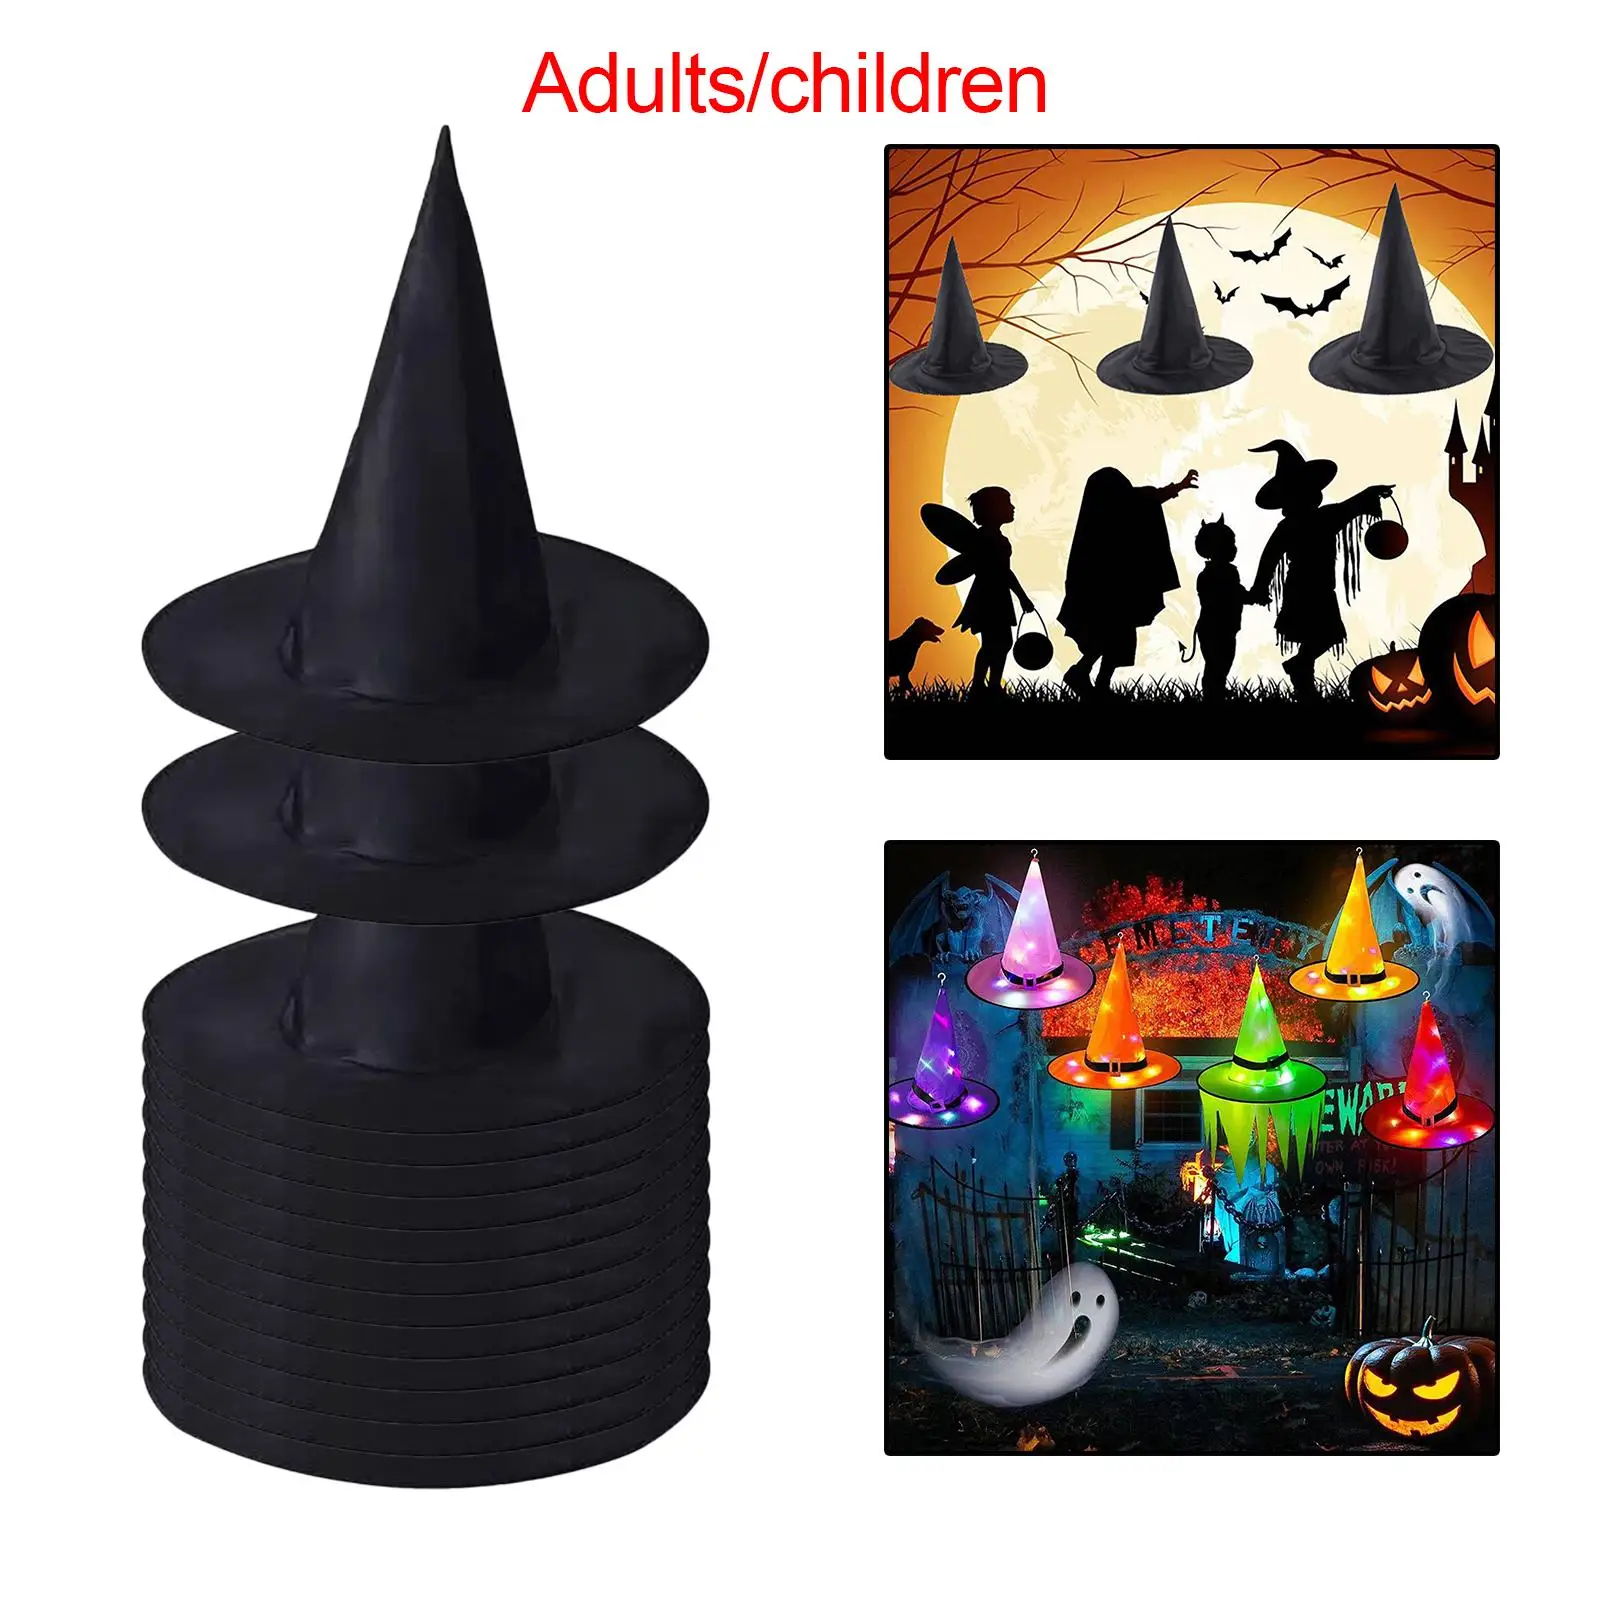 14x Pointed Halloween Witch Hats Cosplay for Party Favors Photo Props Decor